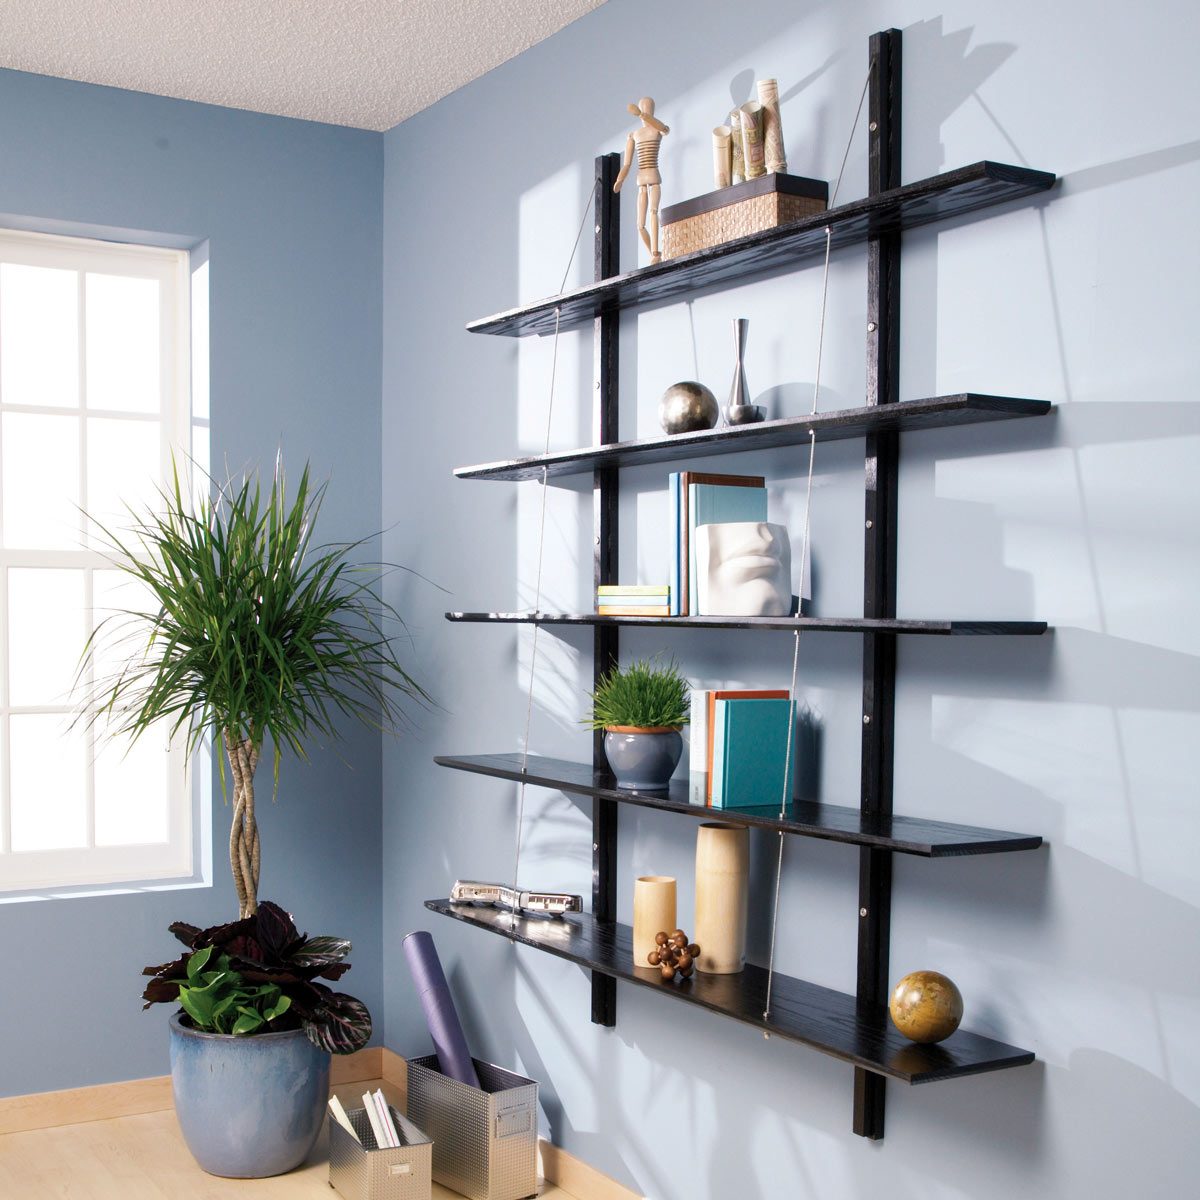 33 Bookcase Projects And Building Tips, How Do You Build A Bookcase Wall